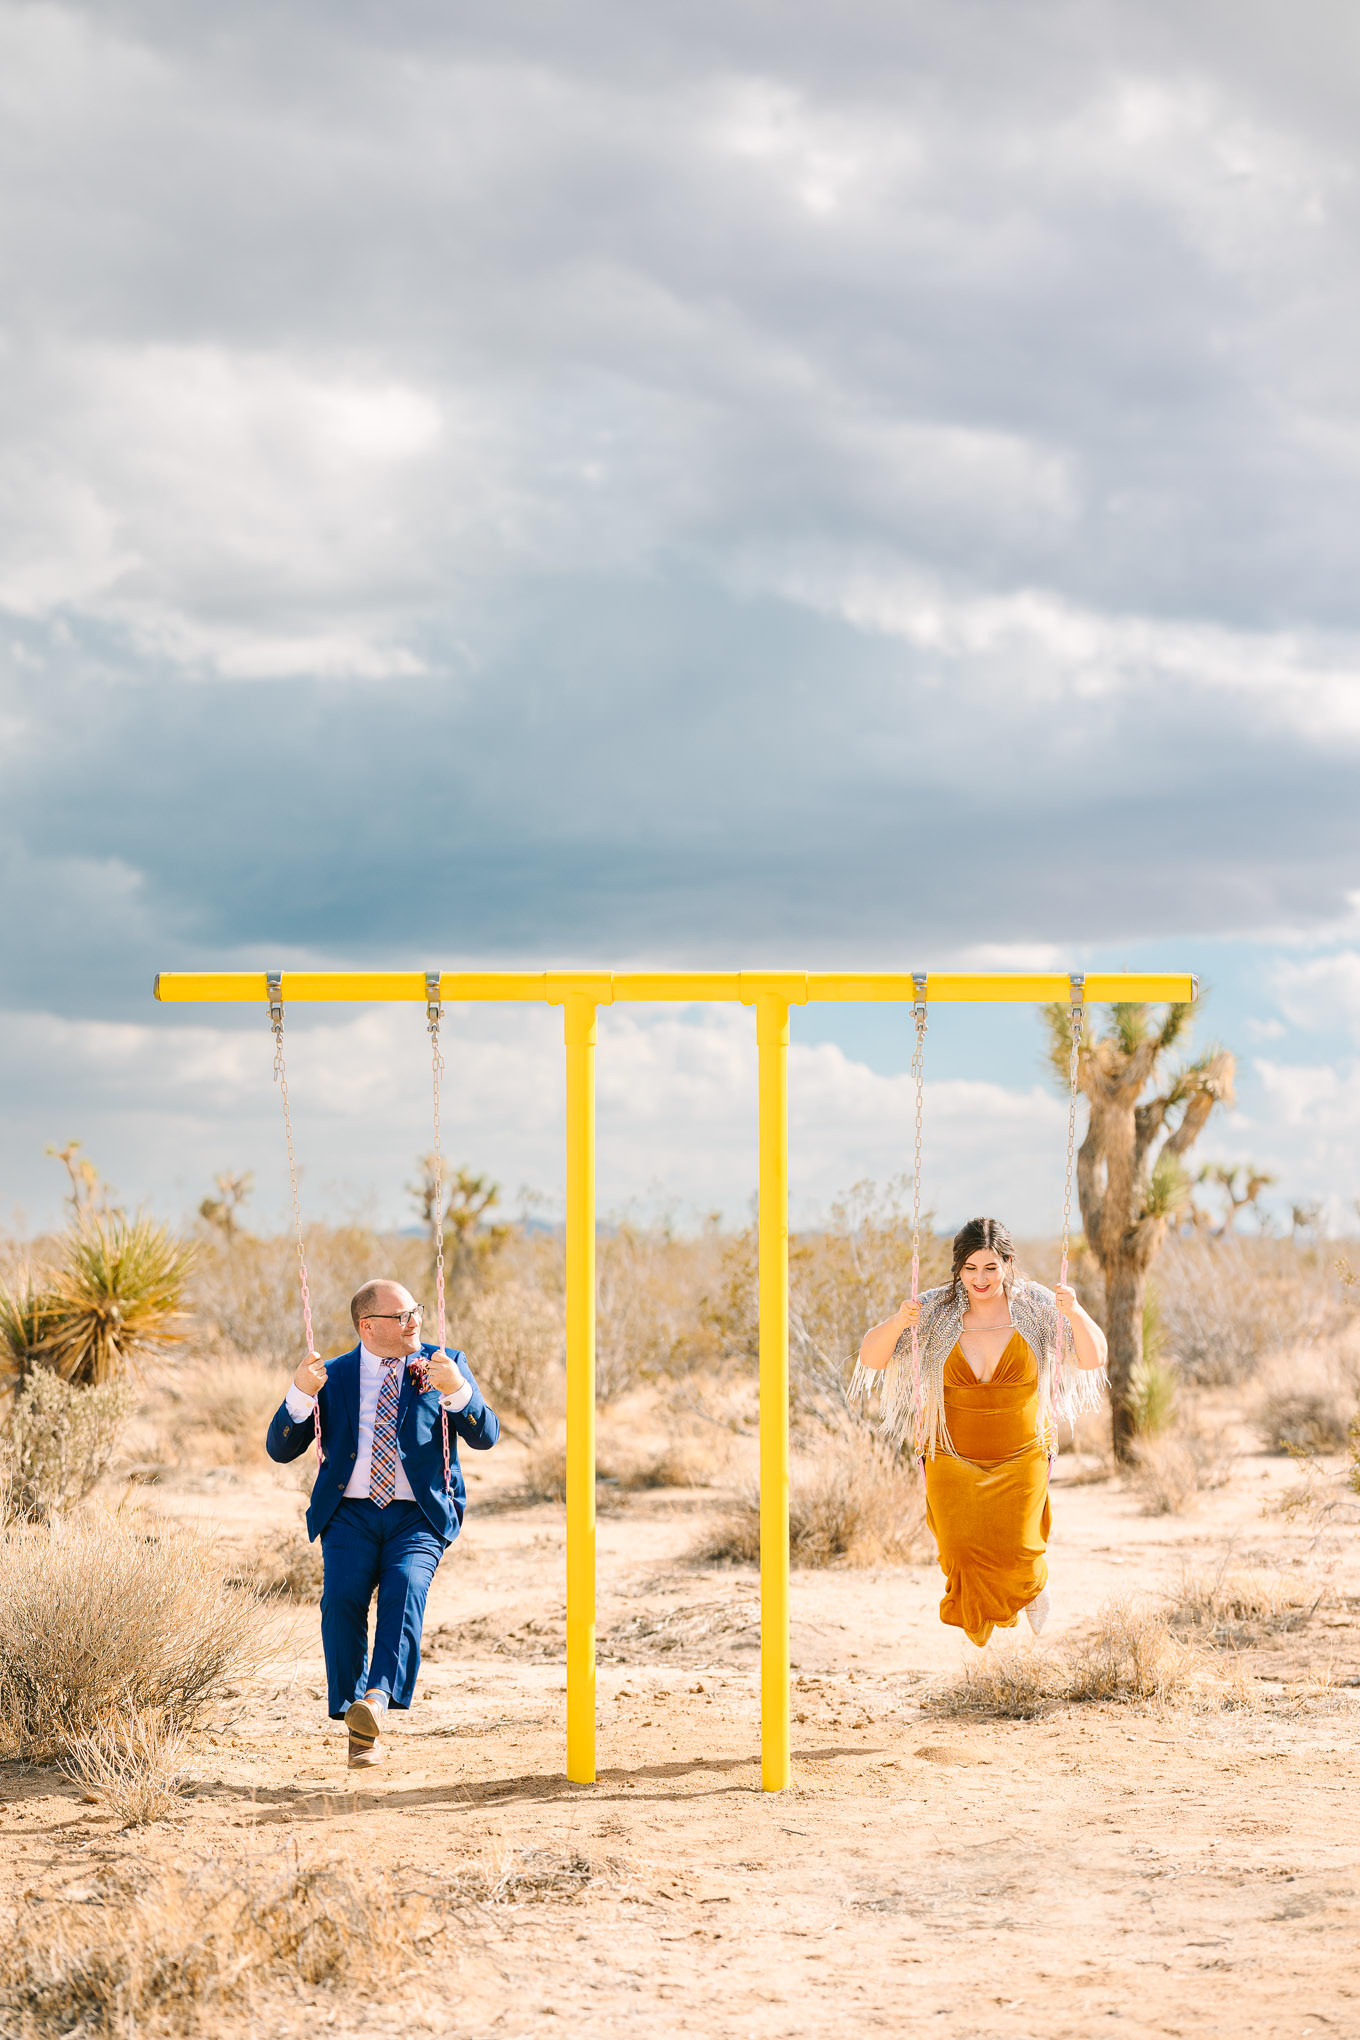 Joshua Tree wedding at The Ruin Venue | Wedding and elopement photography roundup | Los Angeles and Palm Springs photographer | #losangeleswedding #palmspringswedding #elopementphotographer Source: Mary Costa Photography | Los Angeles